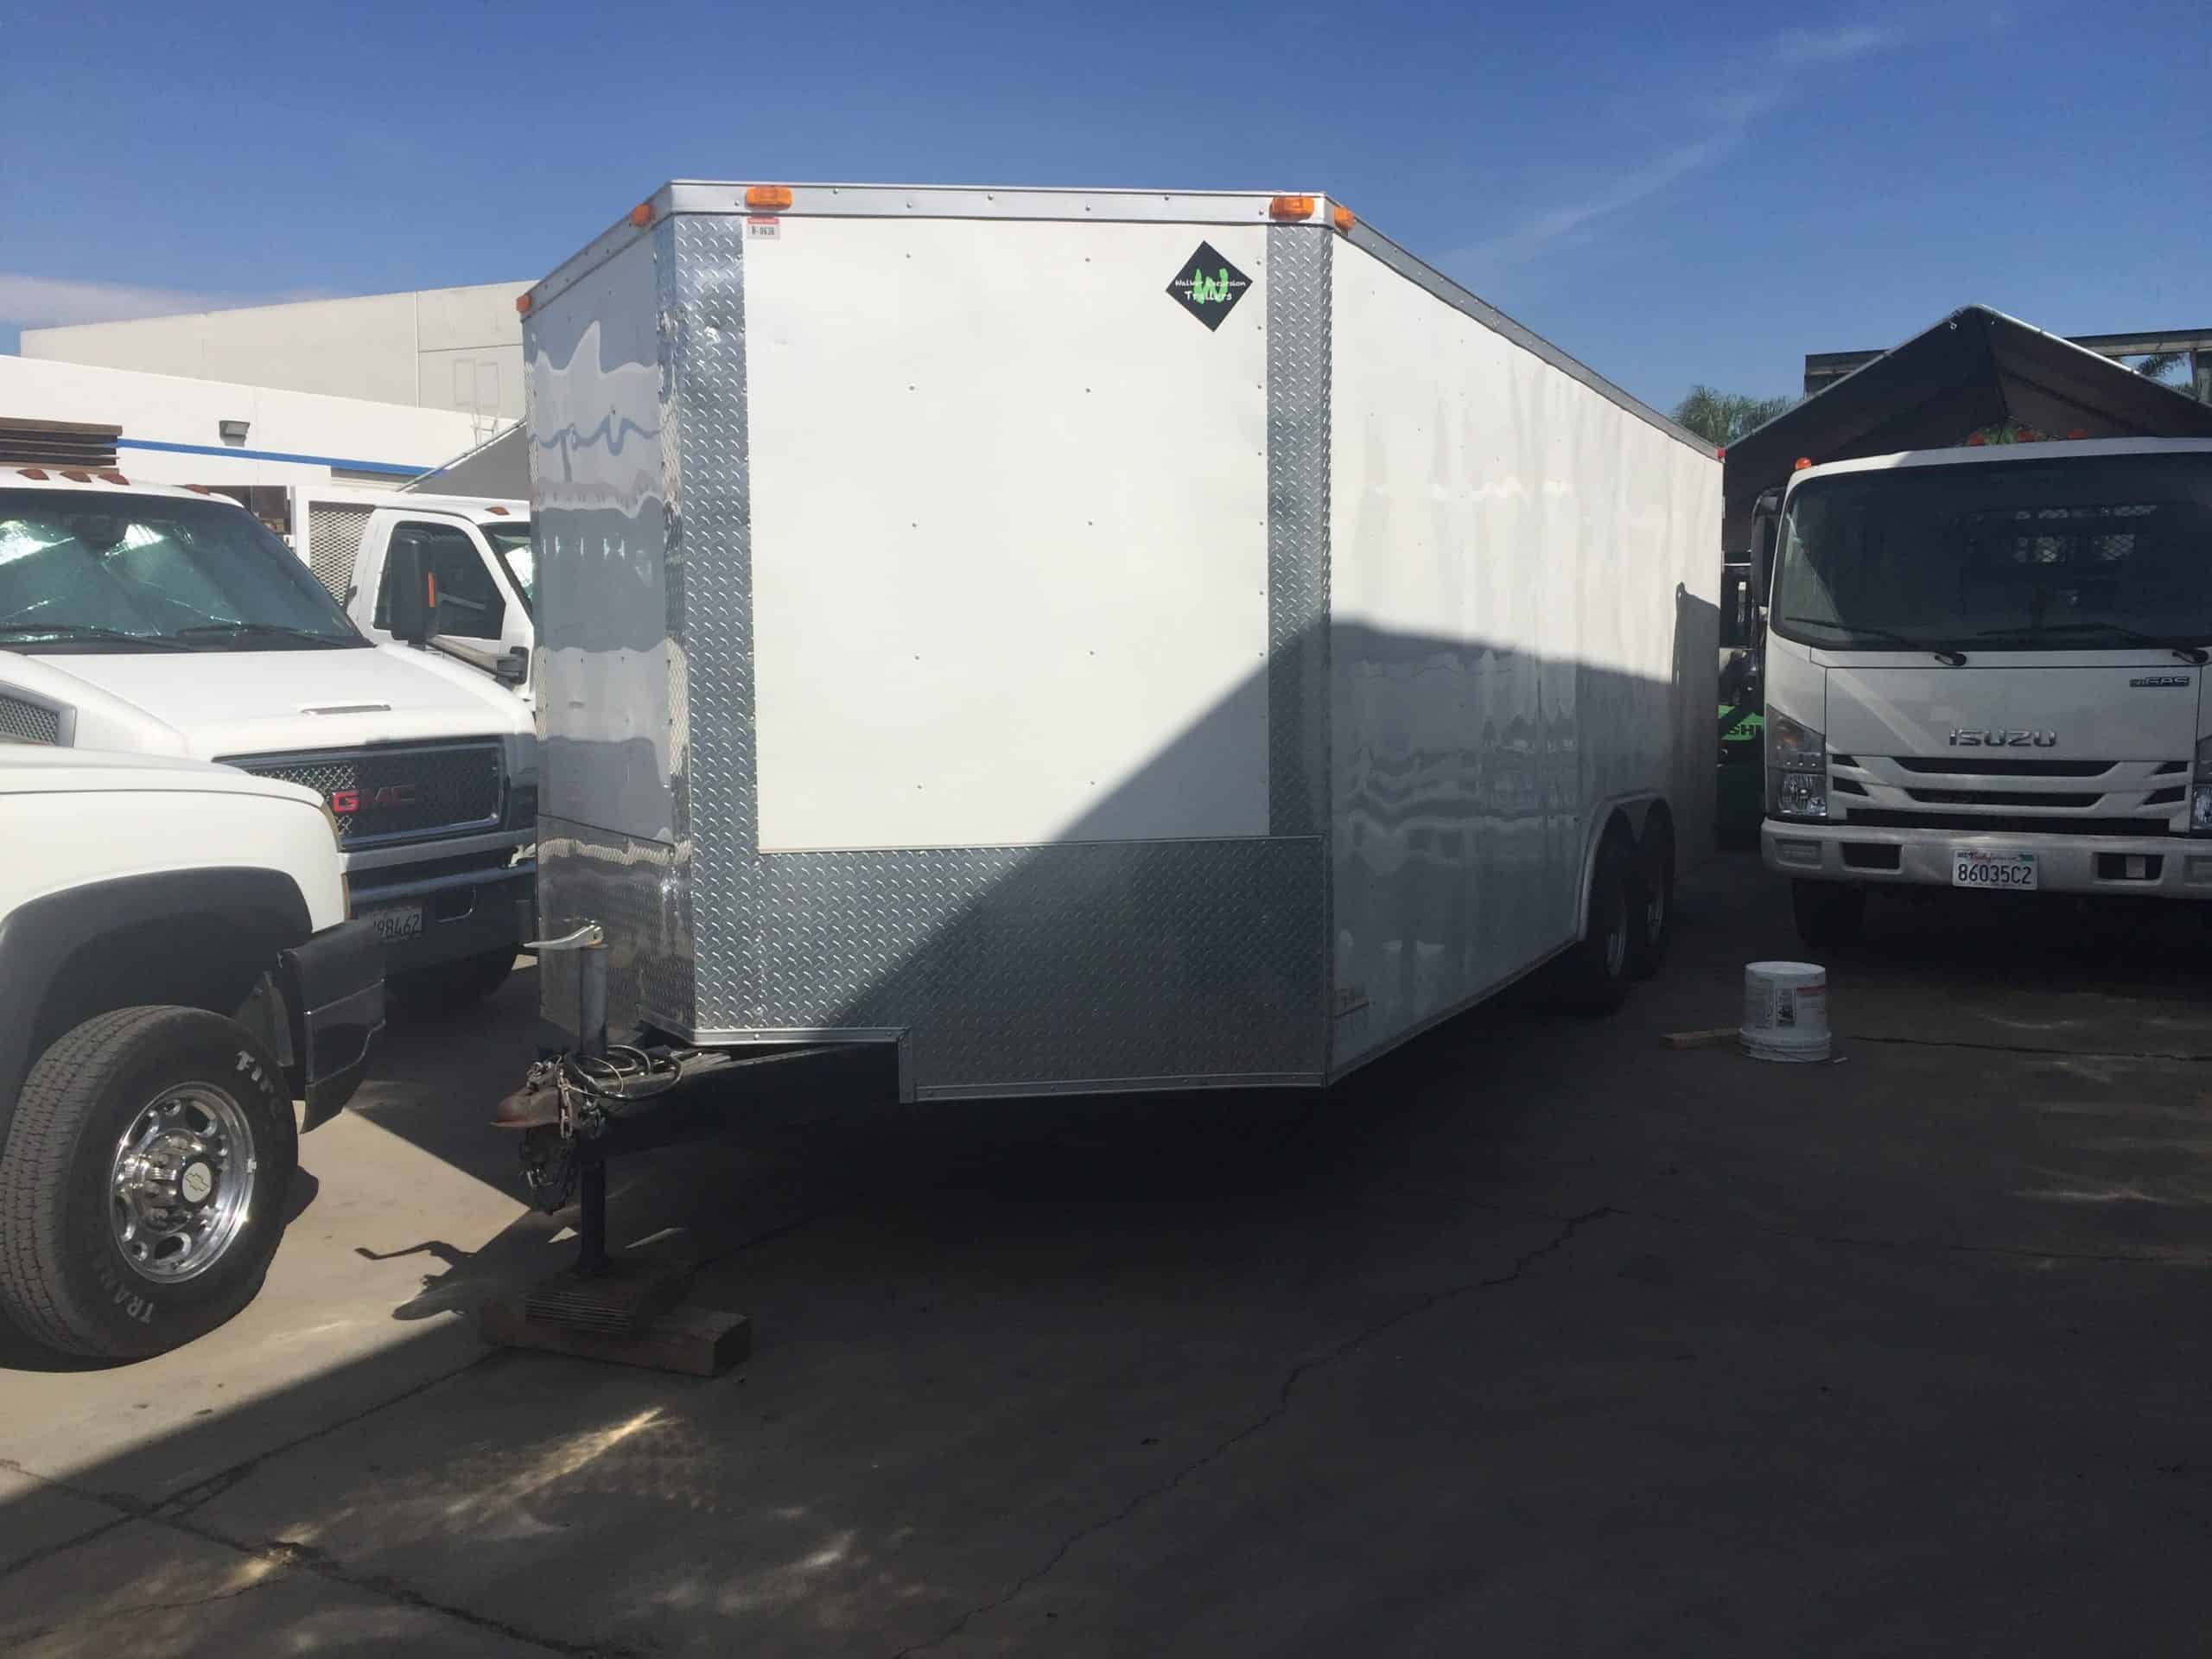 Protect your trailer against theft